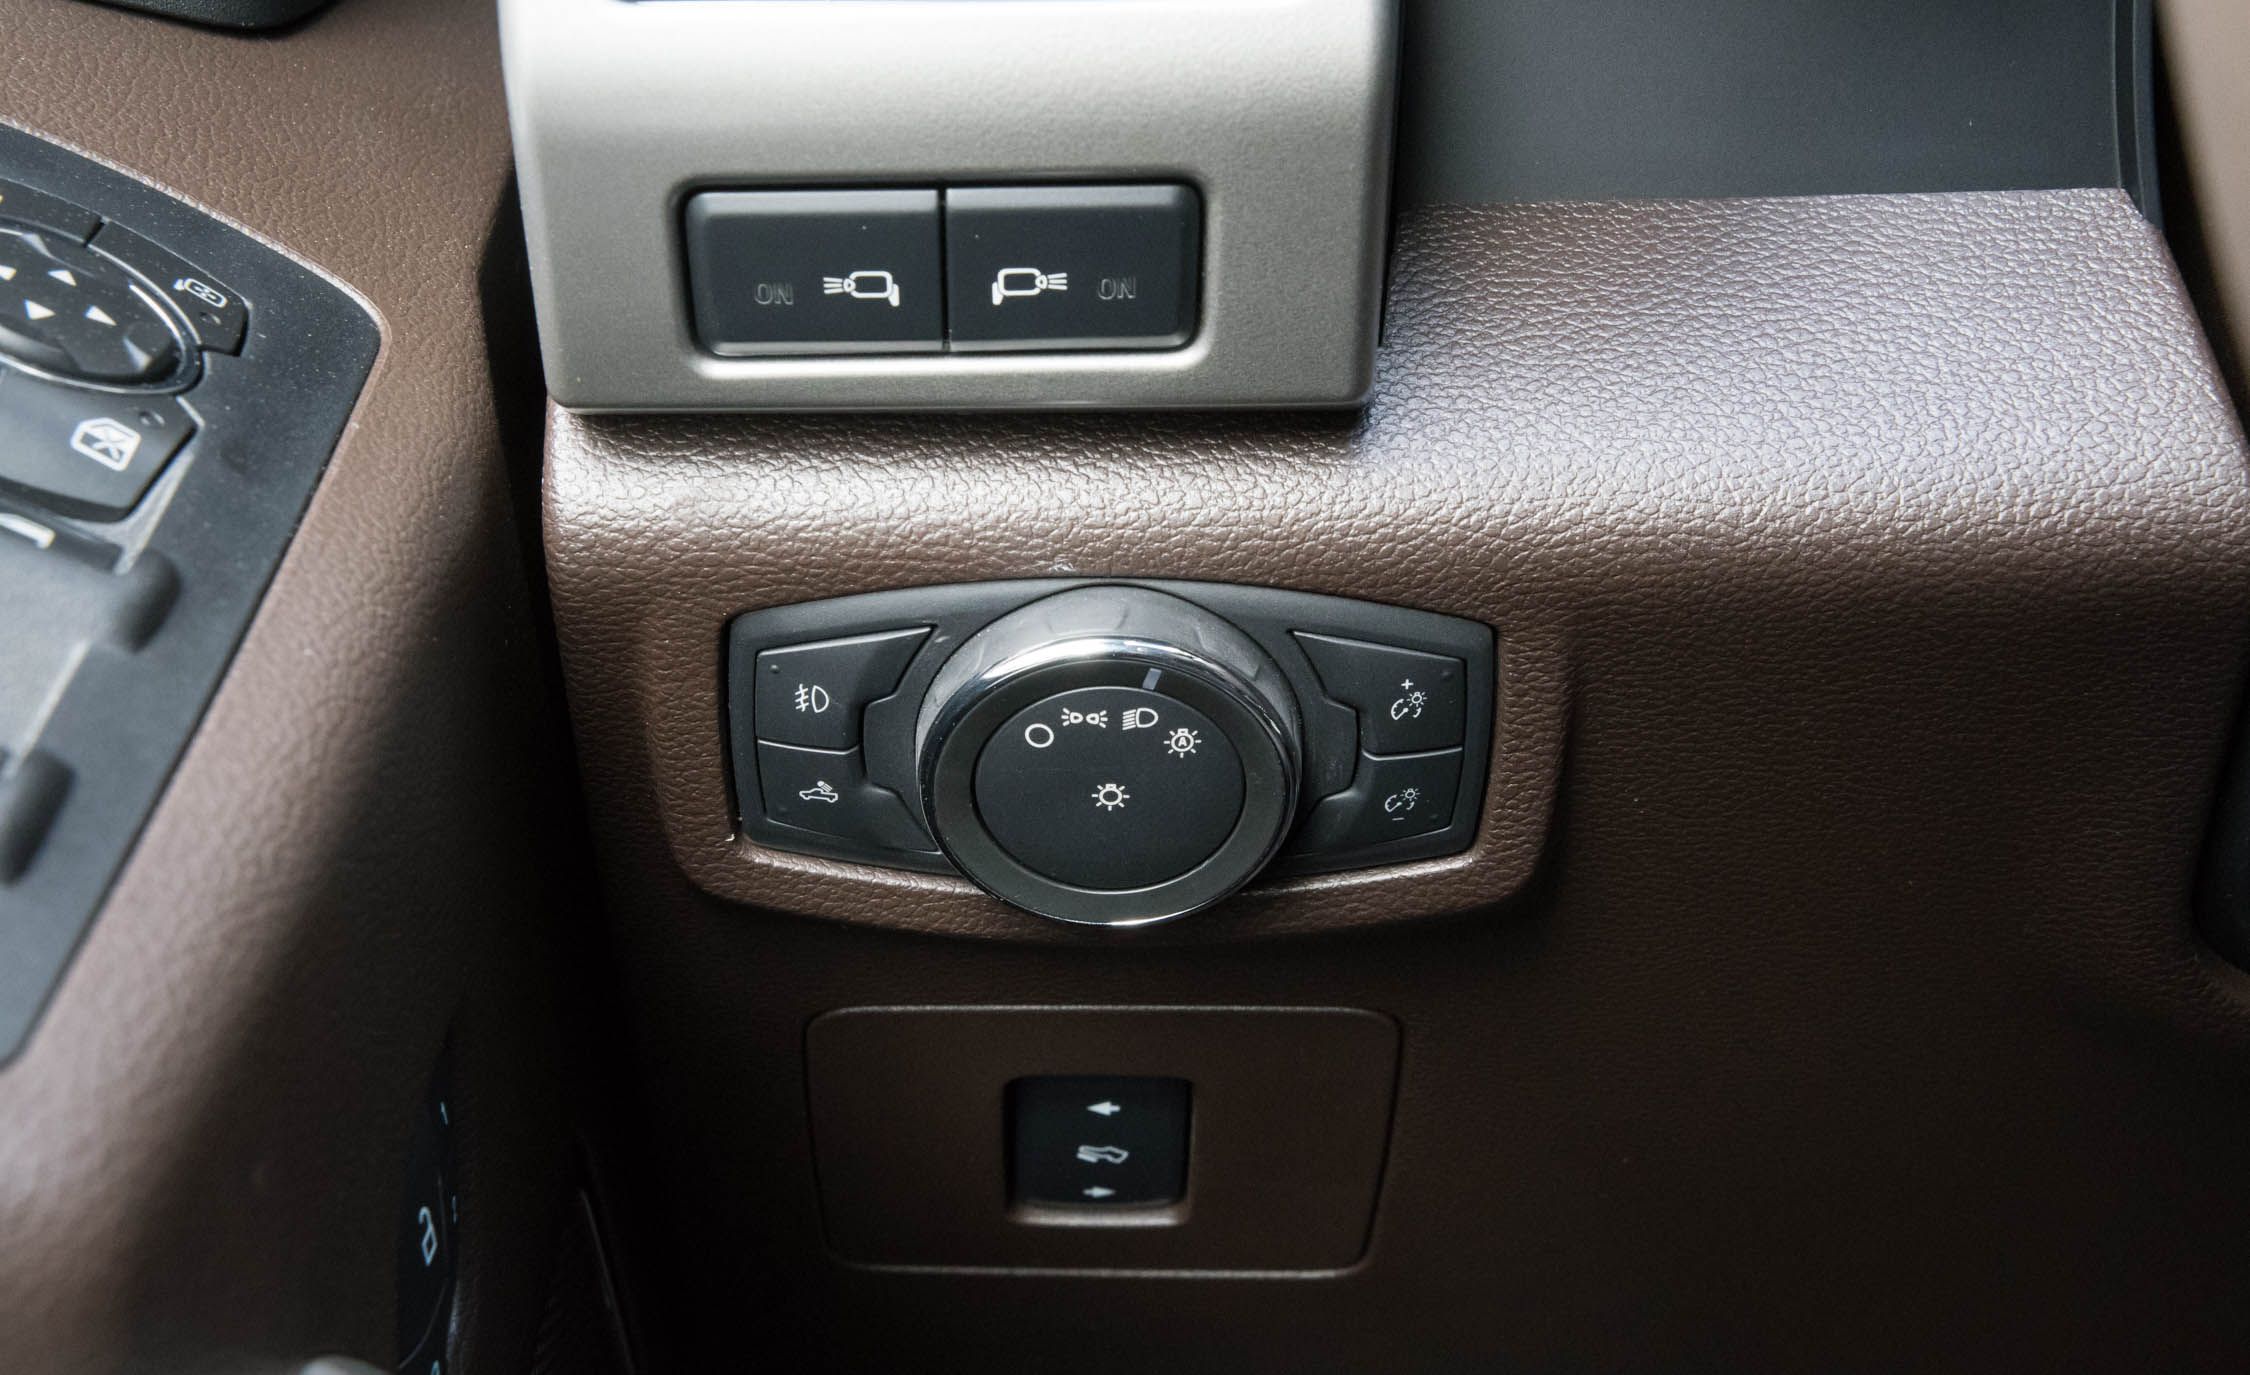 2017 Ford F 150 King Ranch Interior View Lighting Controls (View 6 of 50)